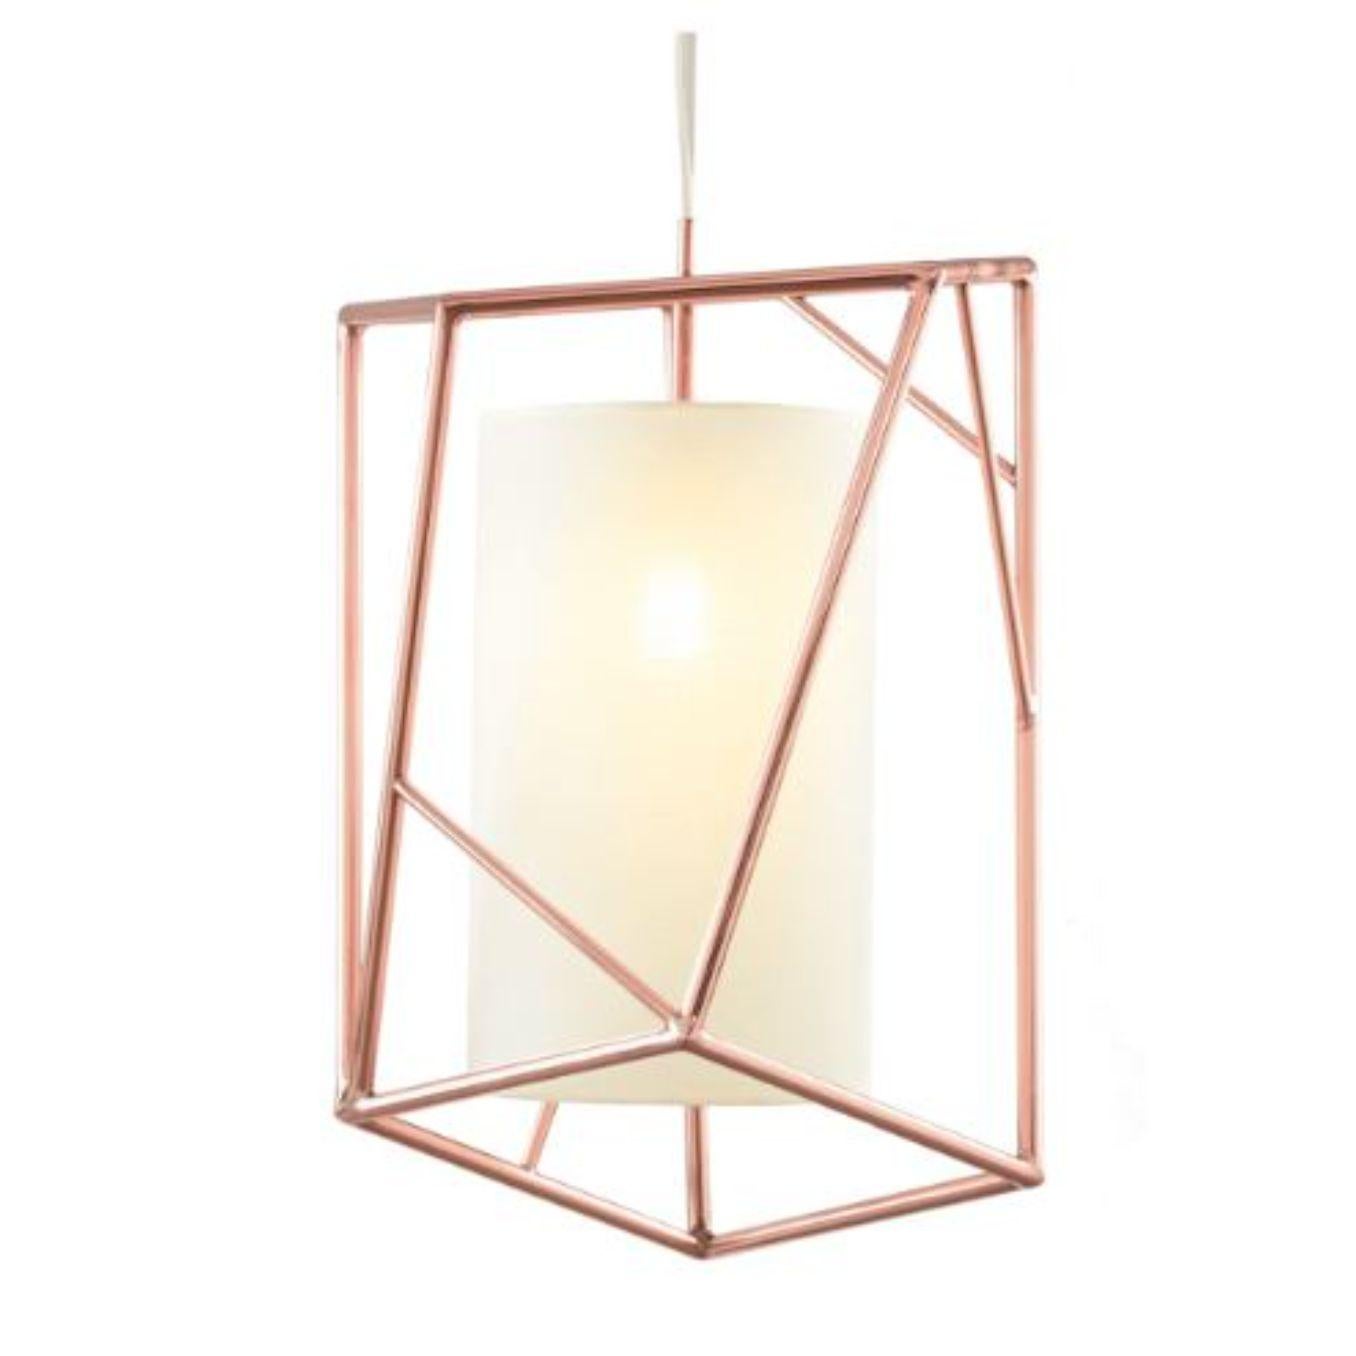 Copper Star III suspension lamp by Dooq
Dimensions: W 35 x D 35 x H 53 cm
Materials: lacquered metal, polished or satin metal, copper.
Abat-jour: linen
Also available in different colors and materials.

Information:
230V/50Hz
E27/1x15W